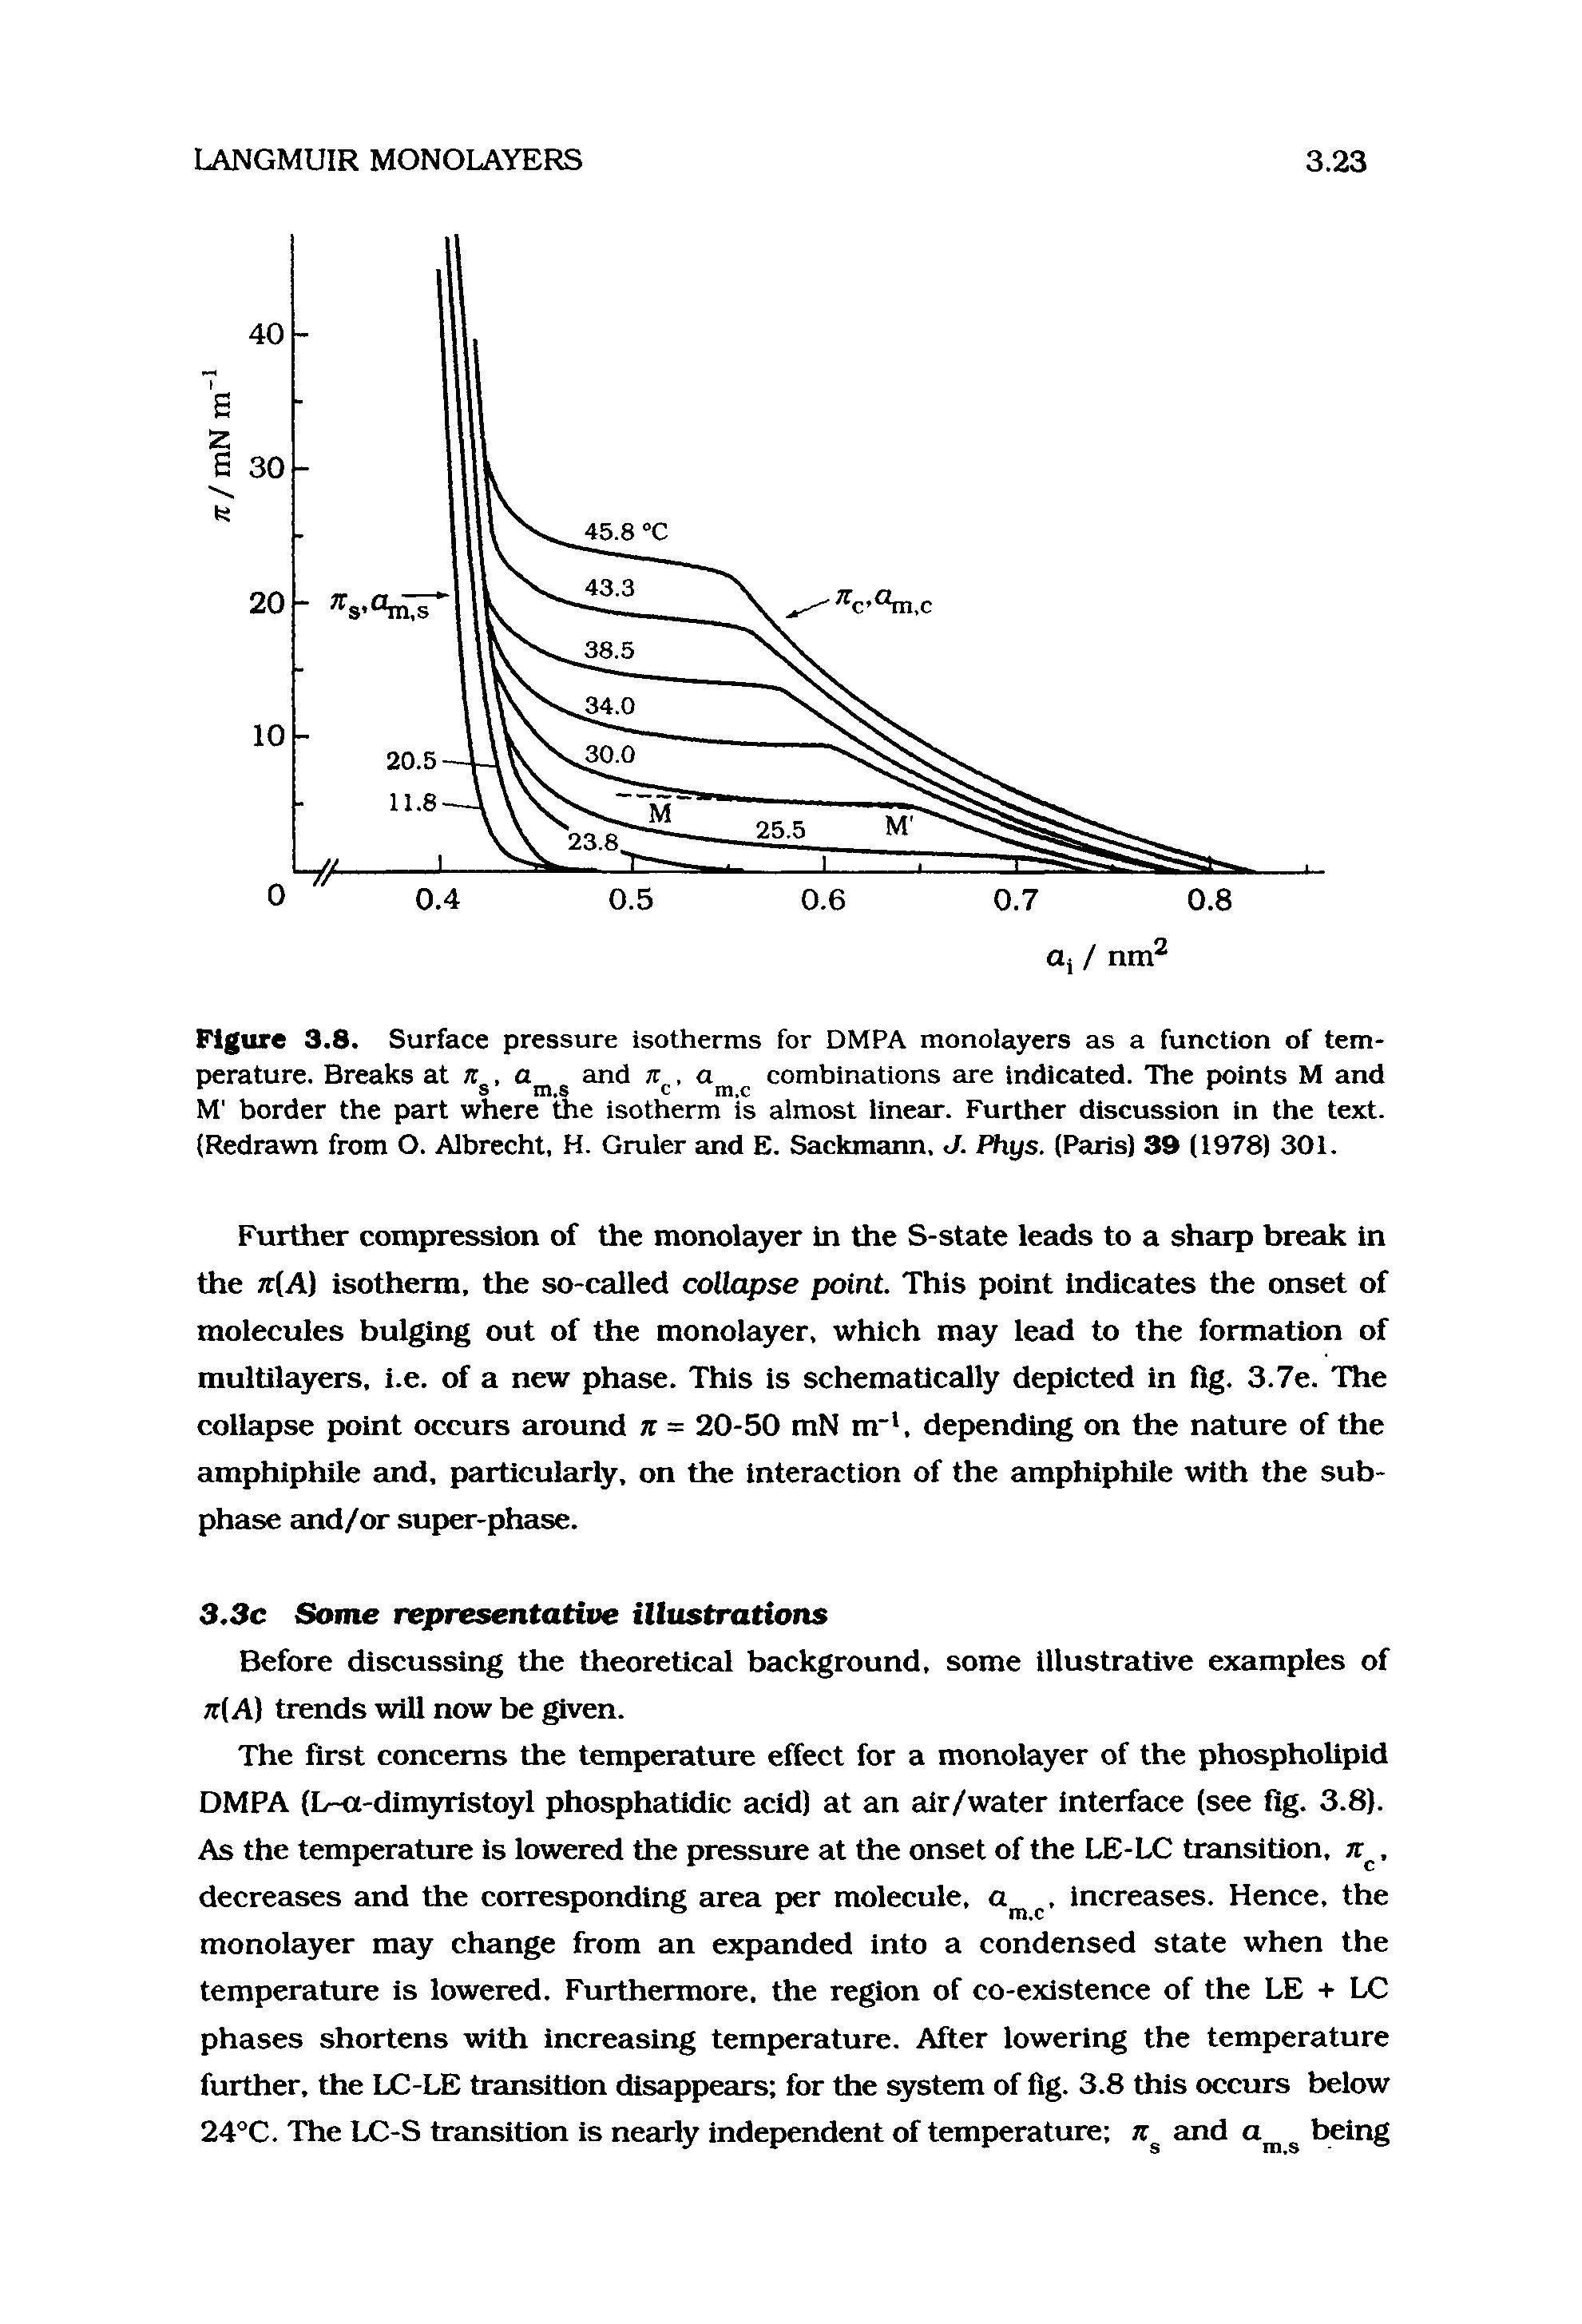 Figure 3.8. Surface pressure isotherms for DMPA monolayers as a function of temperature. Breaks at t, a and k, a combinations are indicated. The twints M and M border the part where the isotherm is almost linear. Further discussion in the text. (Redrawn from O. Albrecht, H. Gruler and E. Sackmann, J. Fhys. (Paris) 39 (1978) 301.